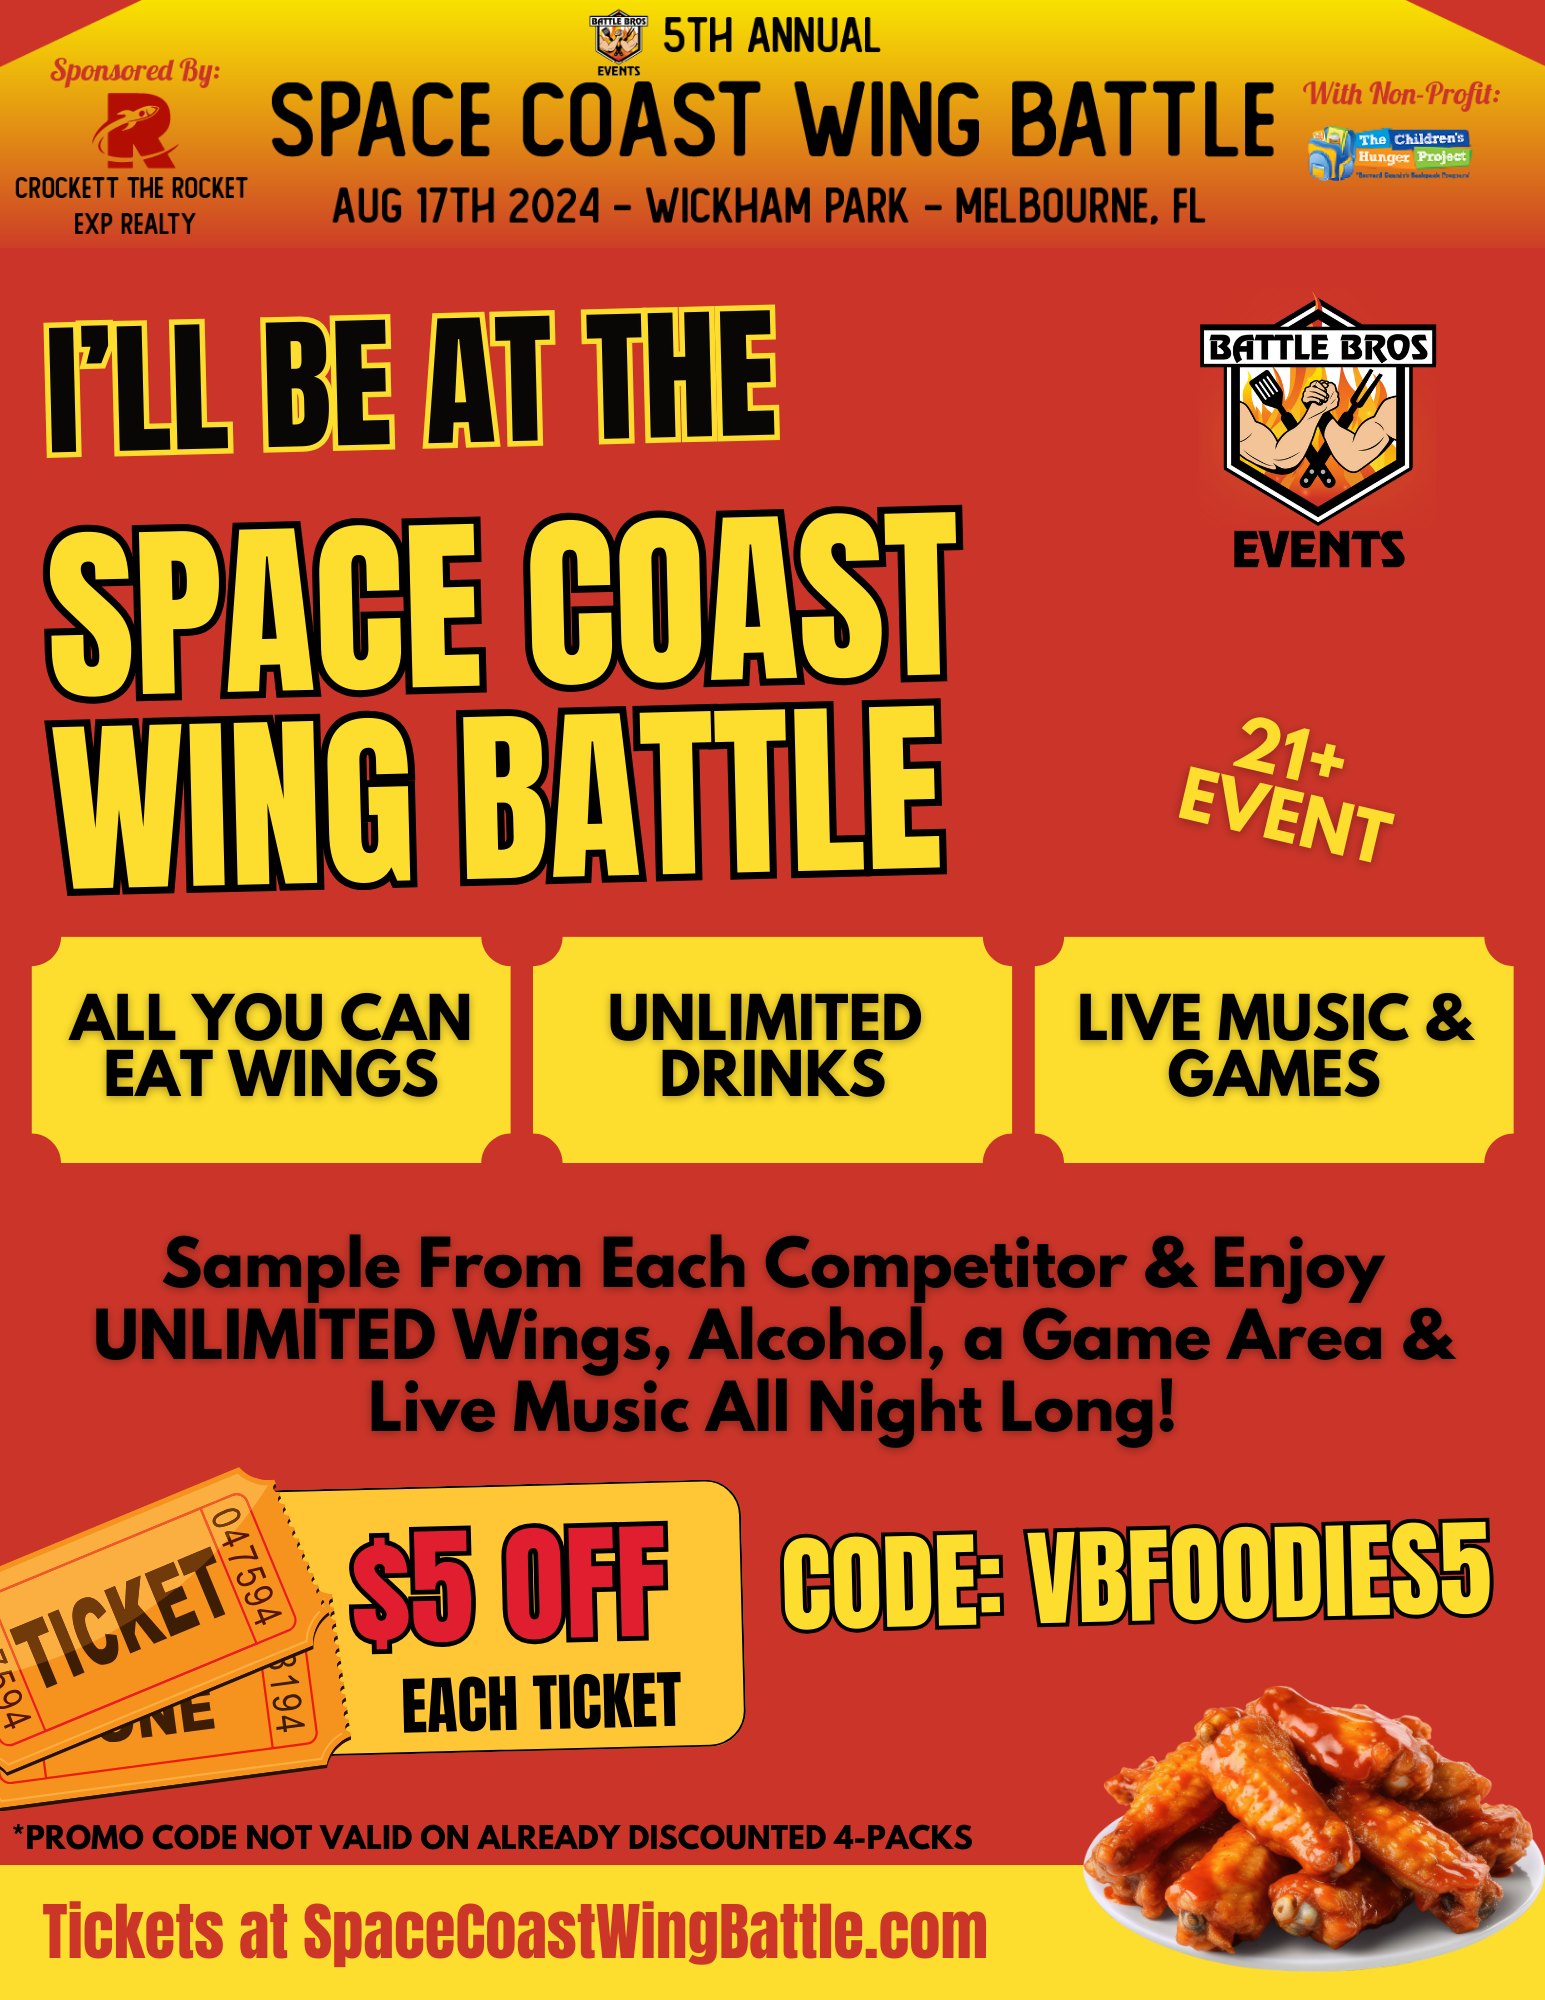 Featured image for “5th Annual Space Coast Wing Battle”